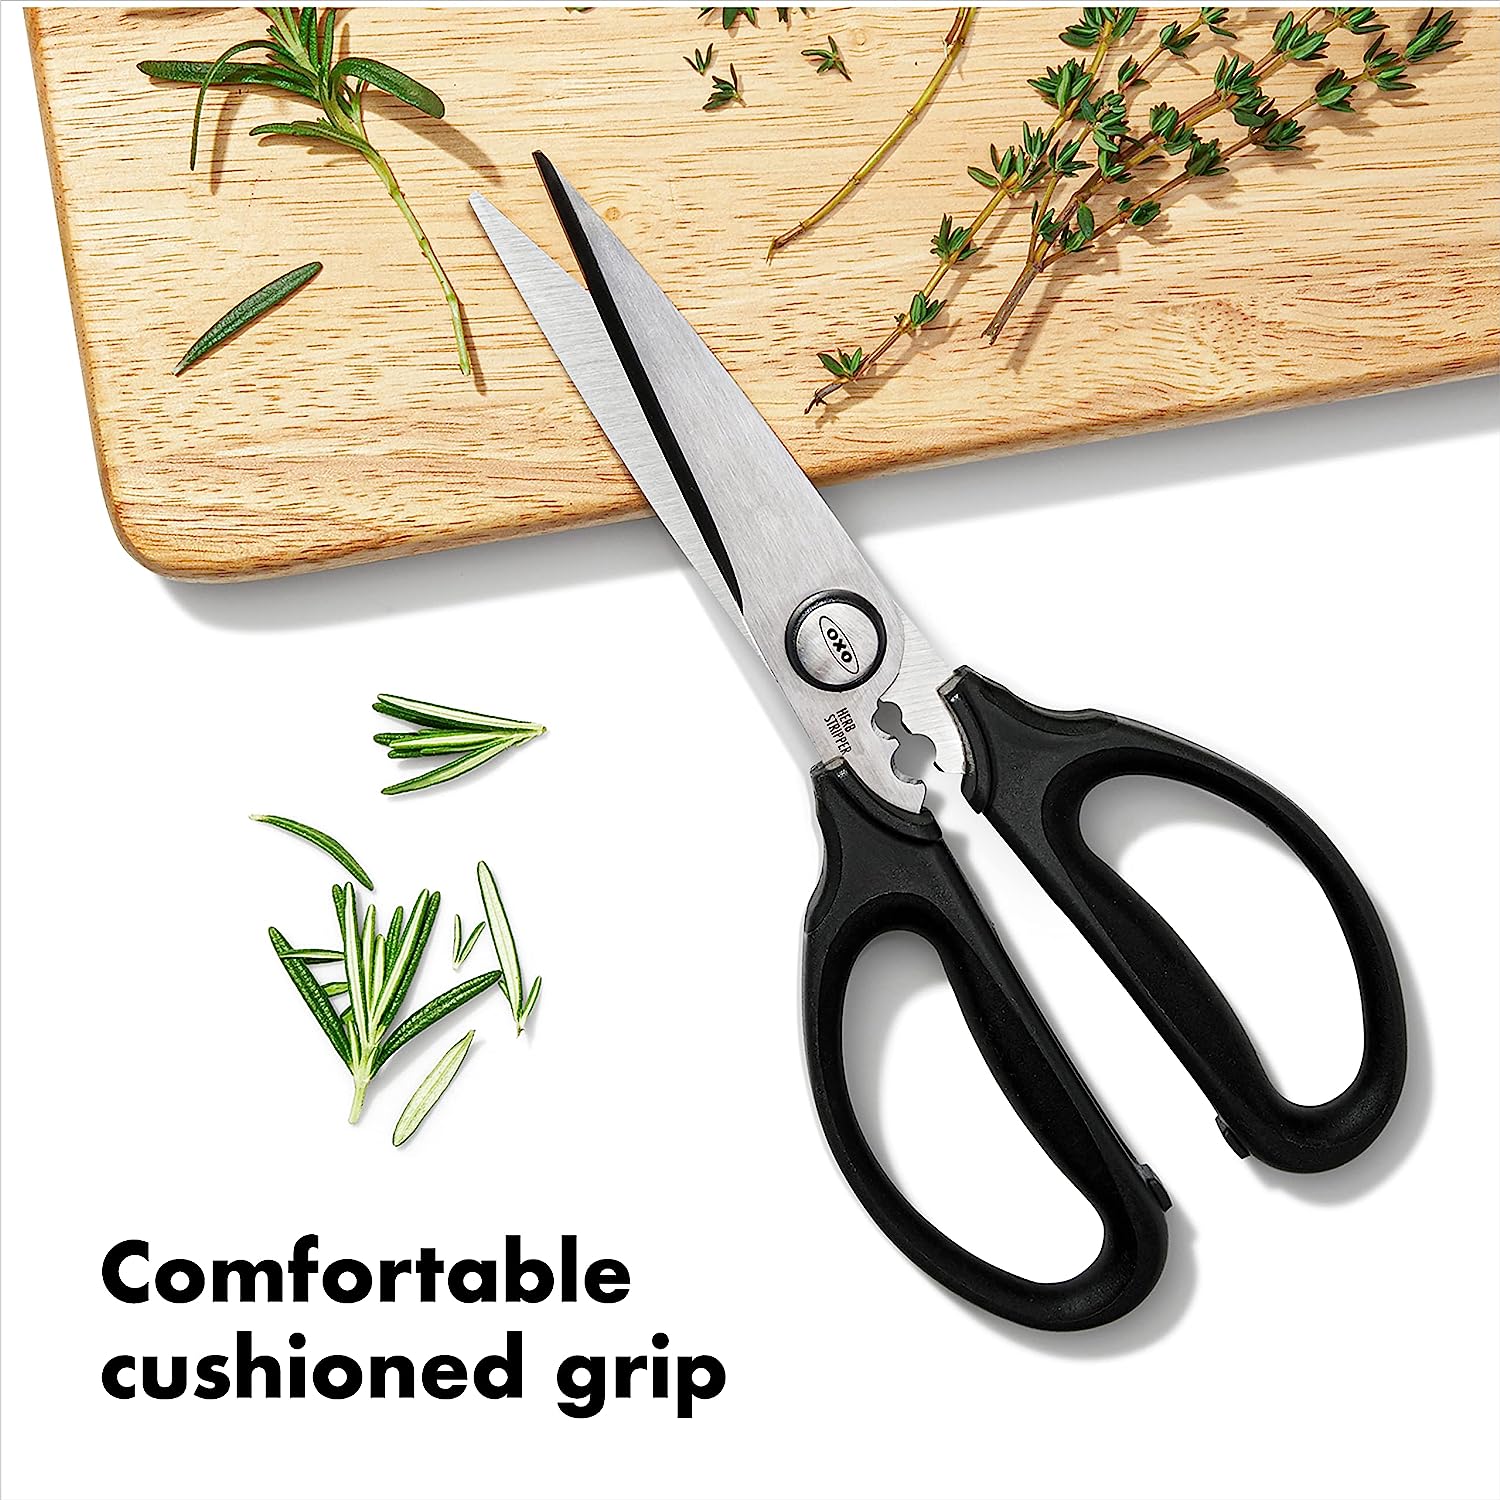 Country Kitchen Set of 2 Kitchen Scissors- Stainless Steel Kitchen Shears,  Cooking Scissors for Cutting Meat, Chicken, Herbs and Produce with Blade